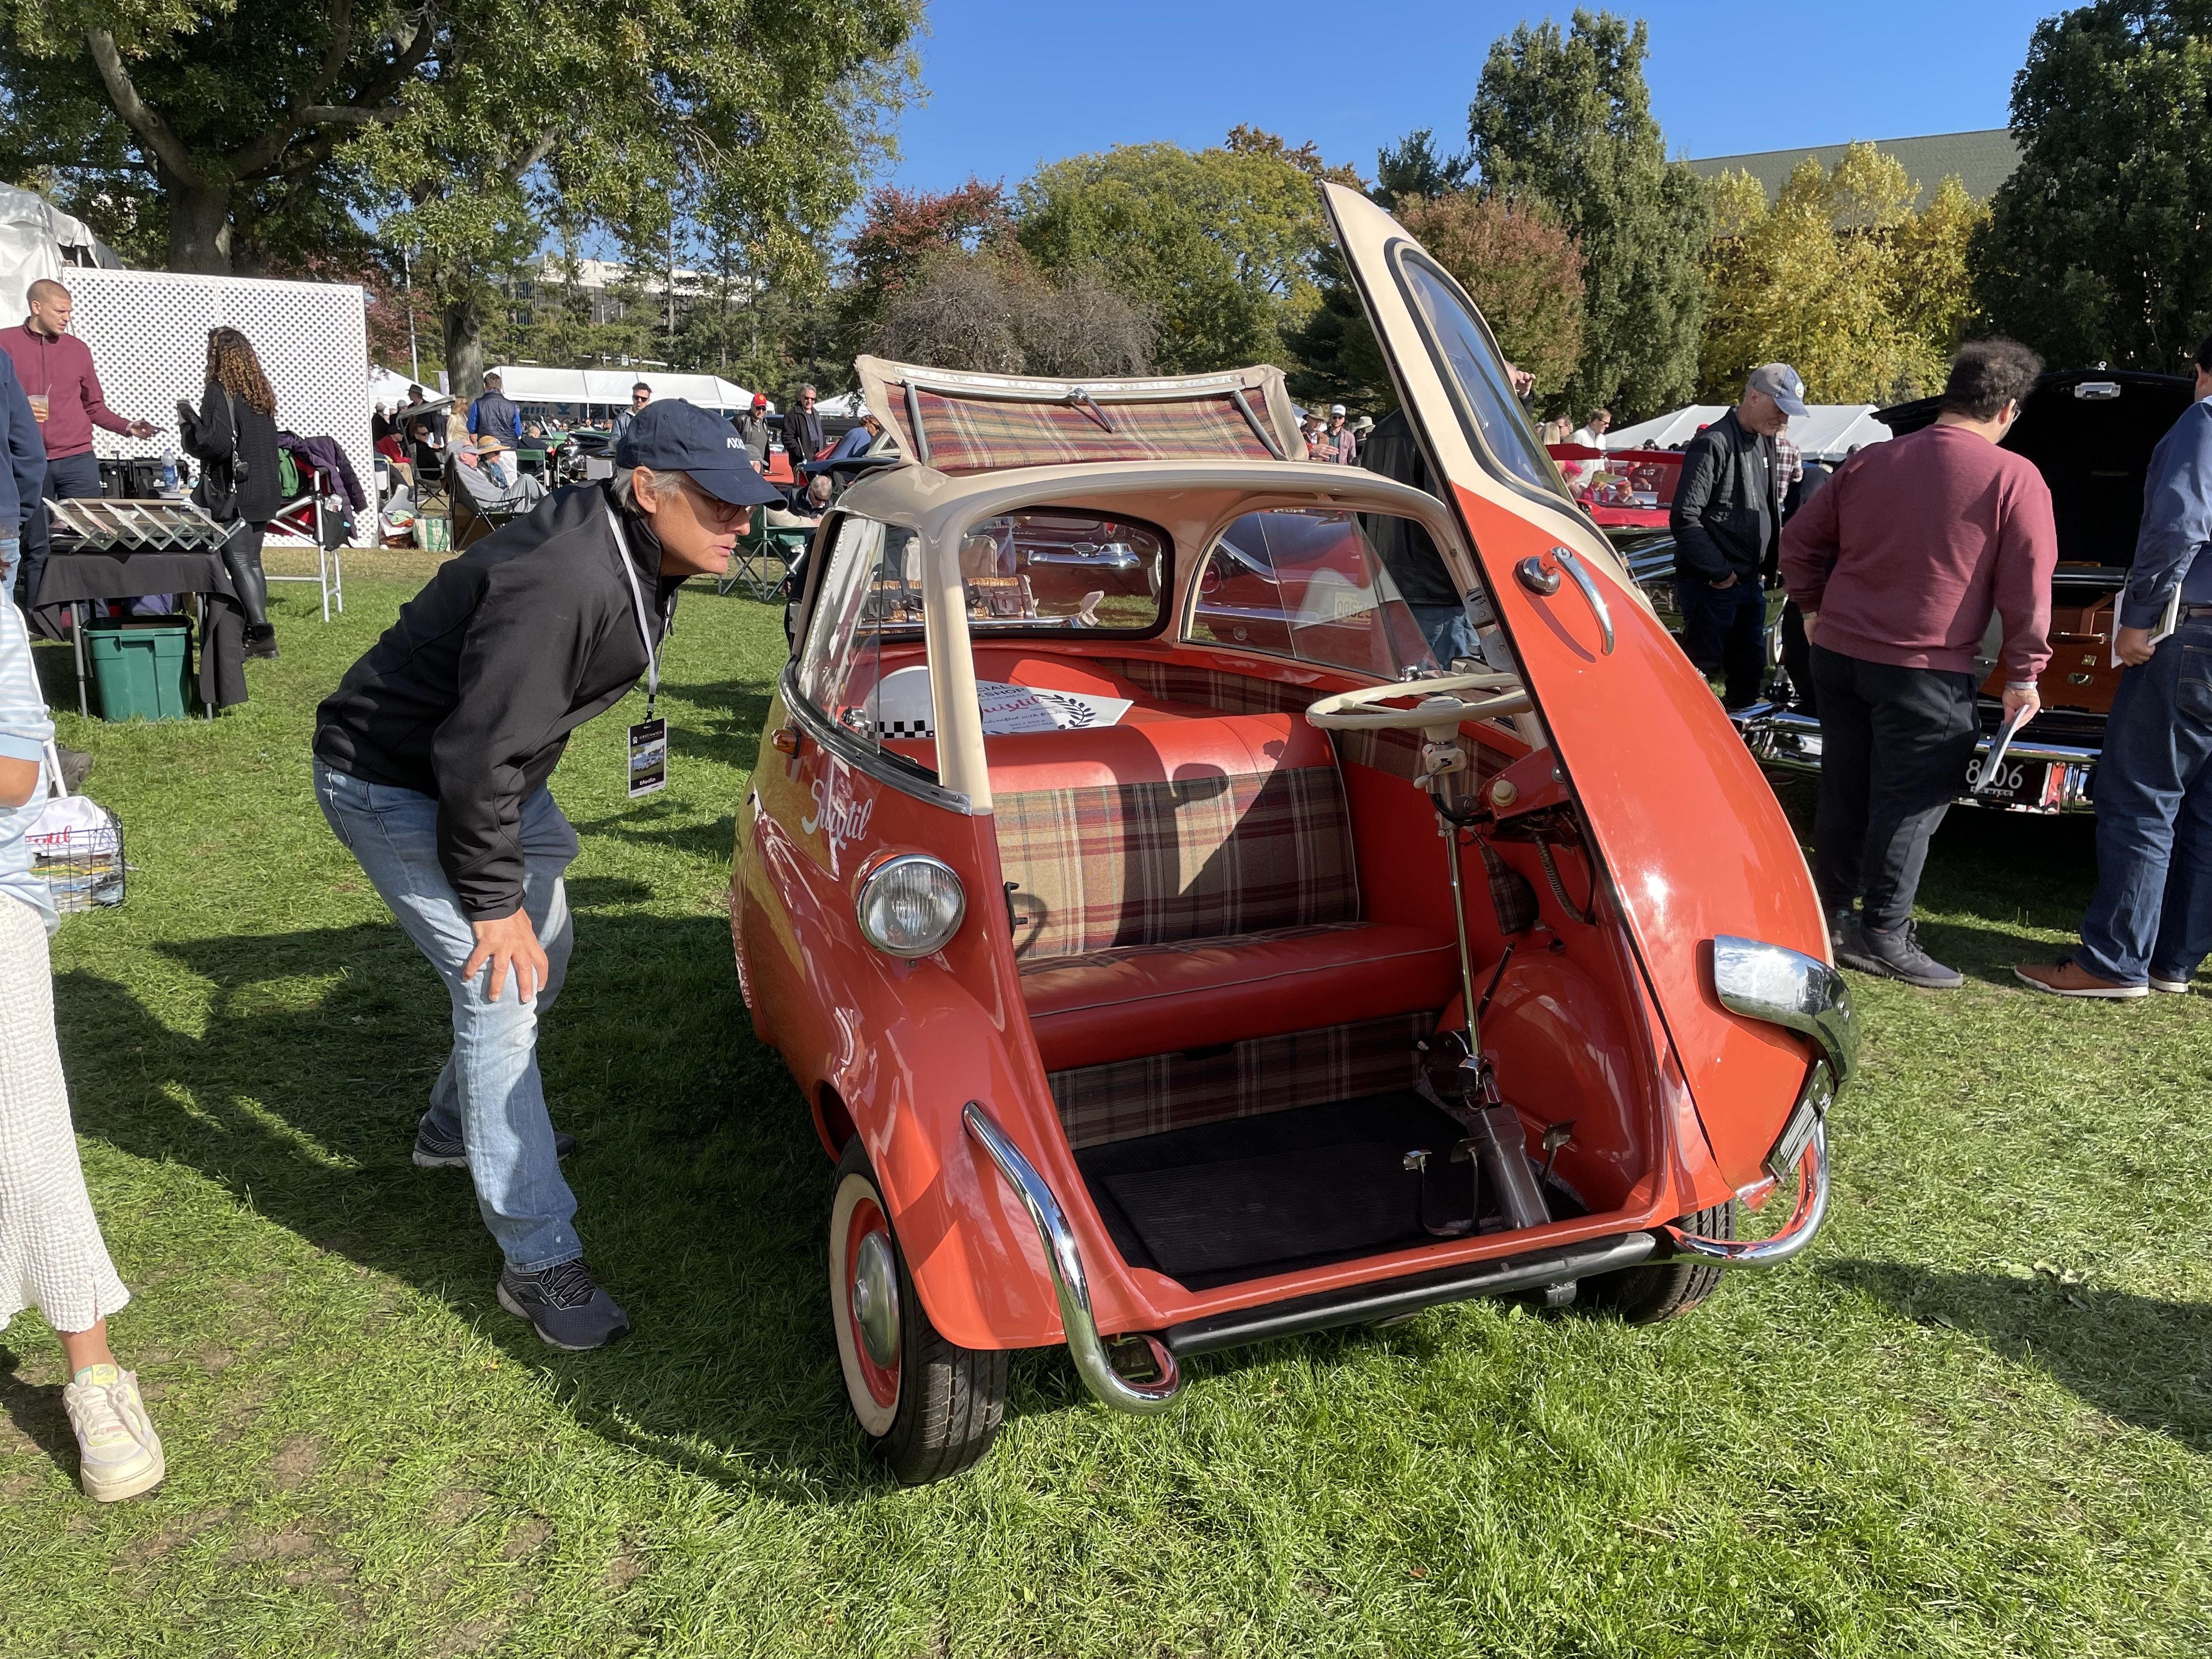 On display at the Greenwich Concours D'Elegance: A 1950s BMW Isetta, which became known as a "bubble car."